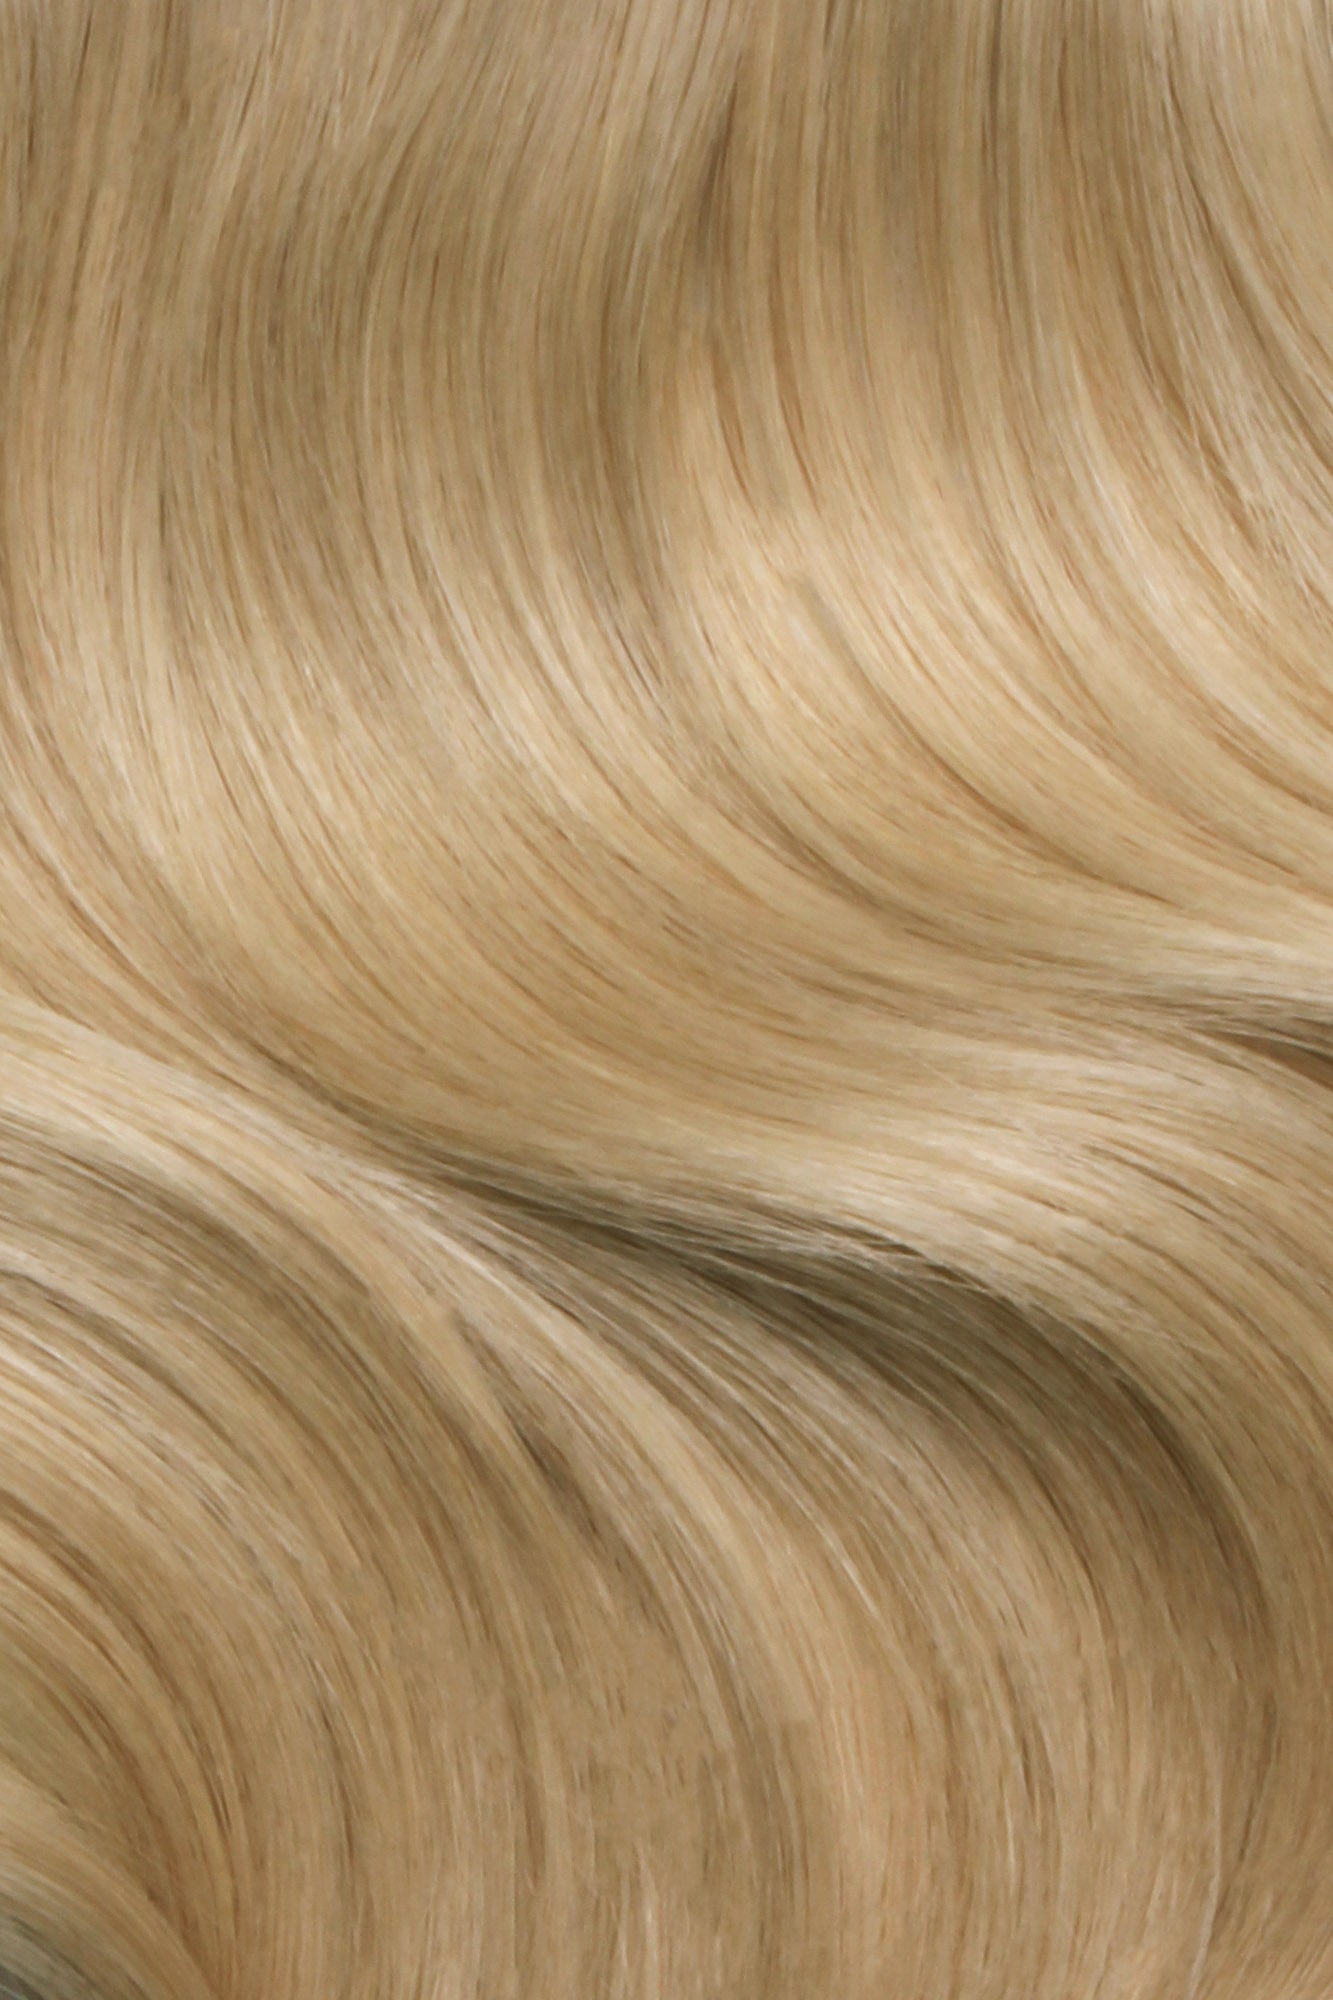 Nano Bonds 22 Inches - SWAY Hair Extensions Beach-Ash-Blonde-9-613 Ultra-fine, invisible bonds for a flawless, natural look. 100% Remy Human hair, lightweight and versatile. Reusable and perfect for individual or salon use.